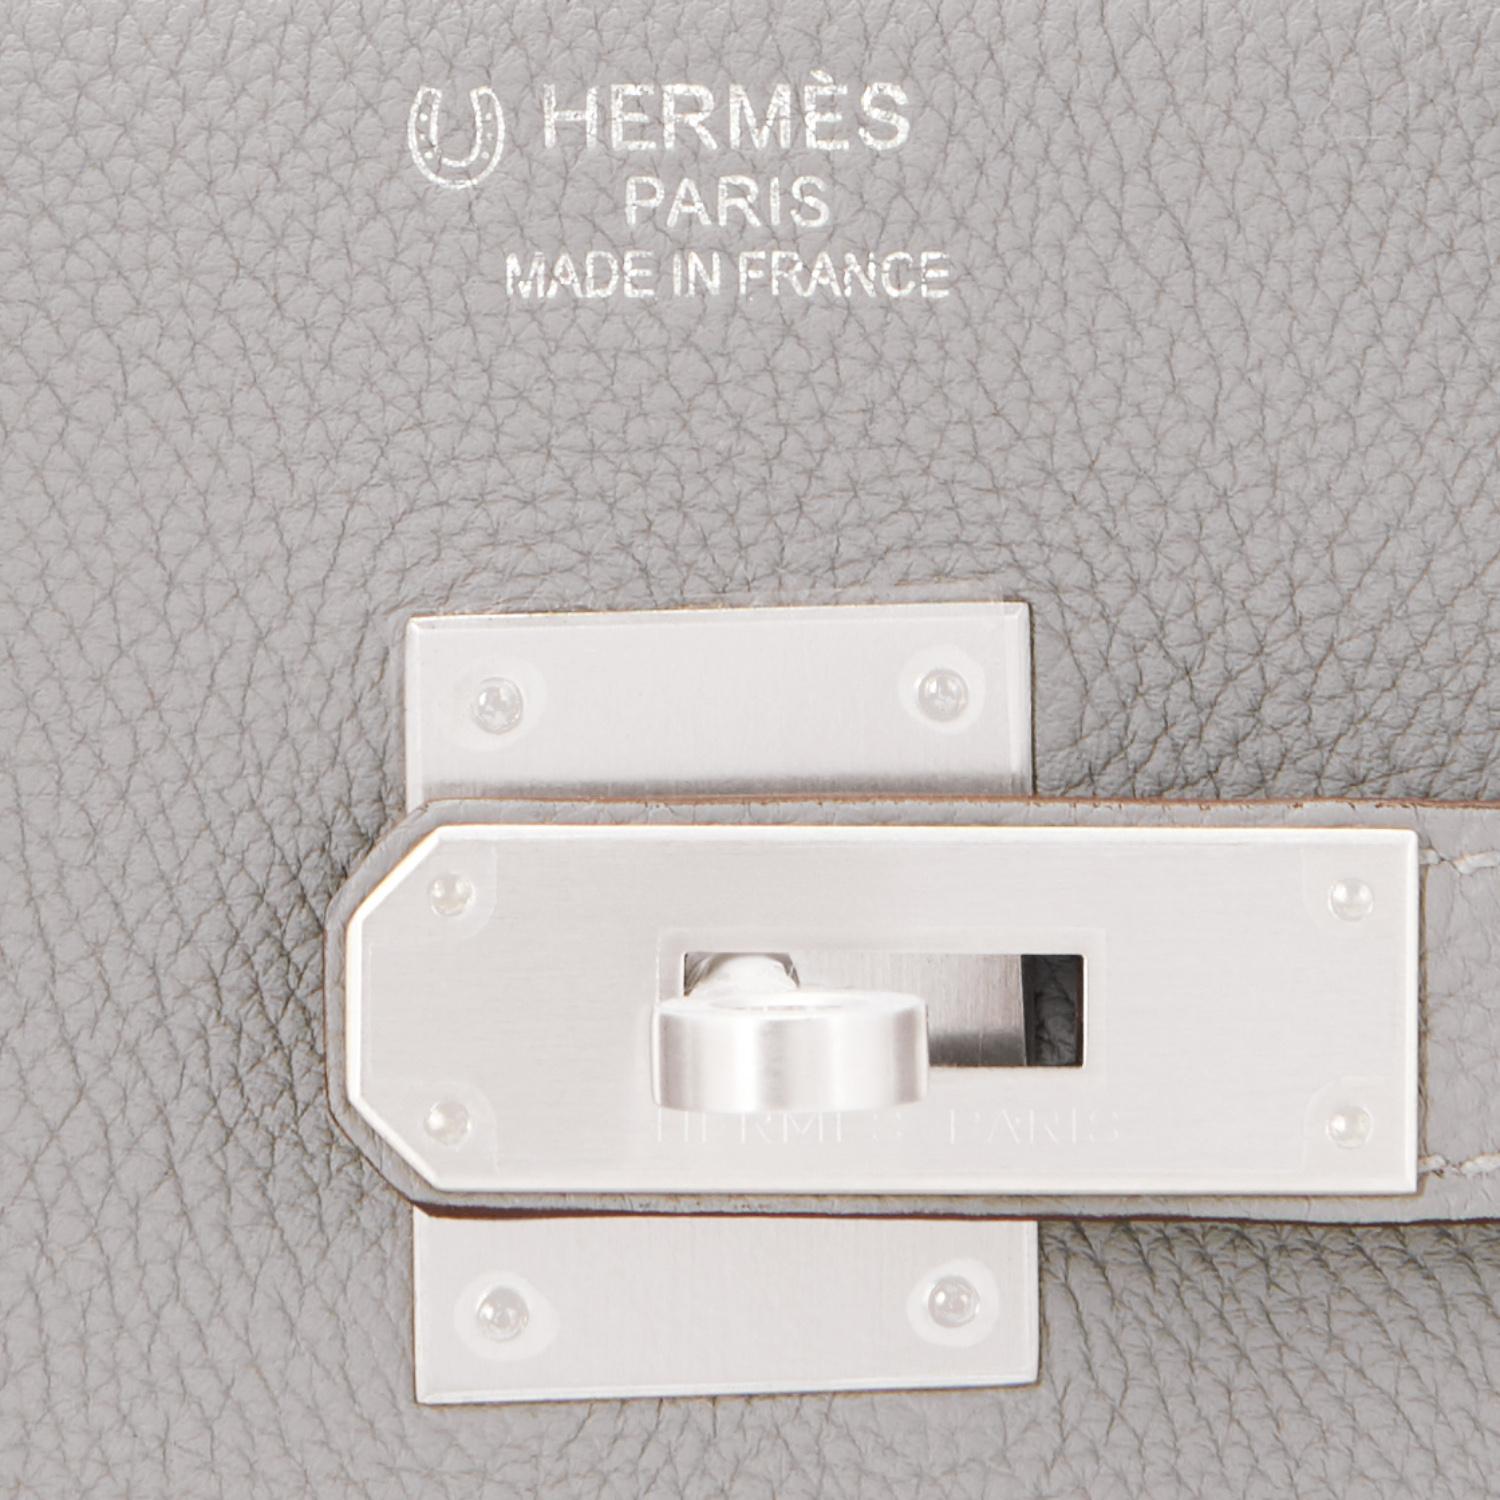 Hermes Birkin 35cm HSS Bi-Color Gris Mouette and Etain Horseshoe Bag Special Order
Brand New in Box. Store fresh.  Pristine Condition (with plastic on hardware) 
Just picked up from Hermes store; bag bears new 2019 interior D stamp!
Perfect gift!